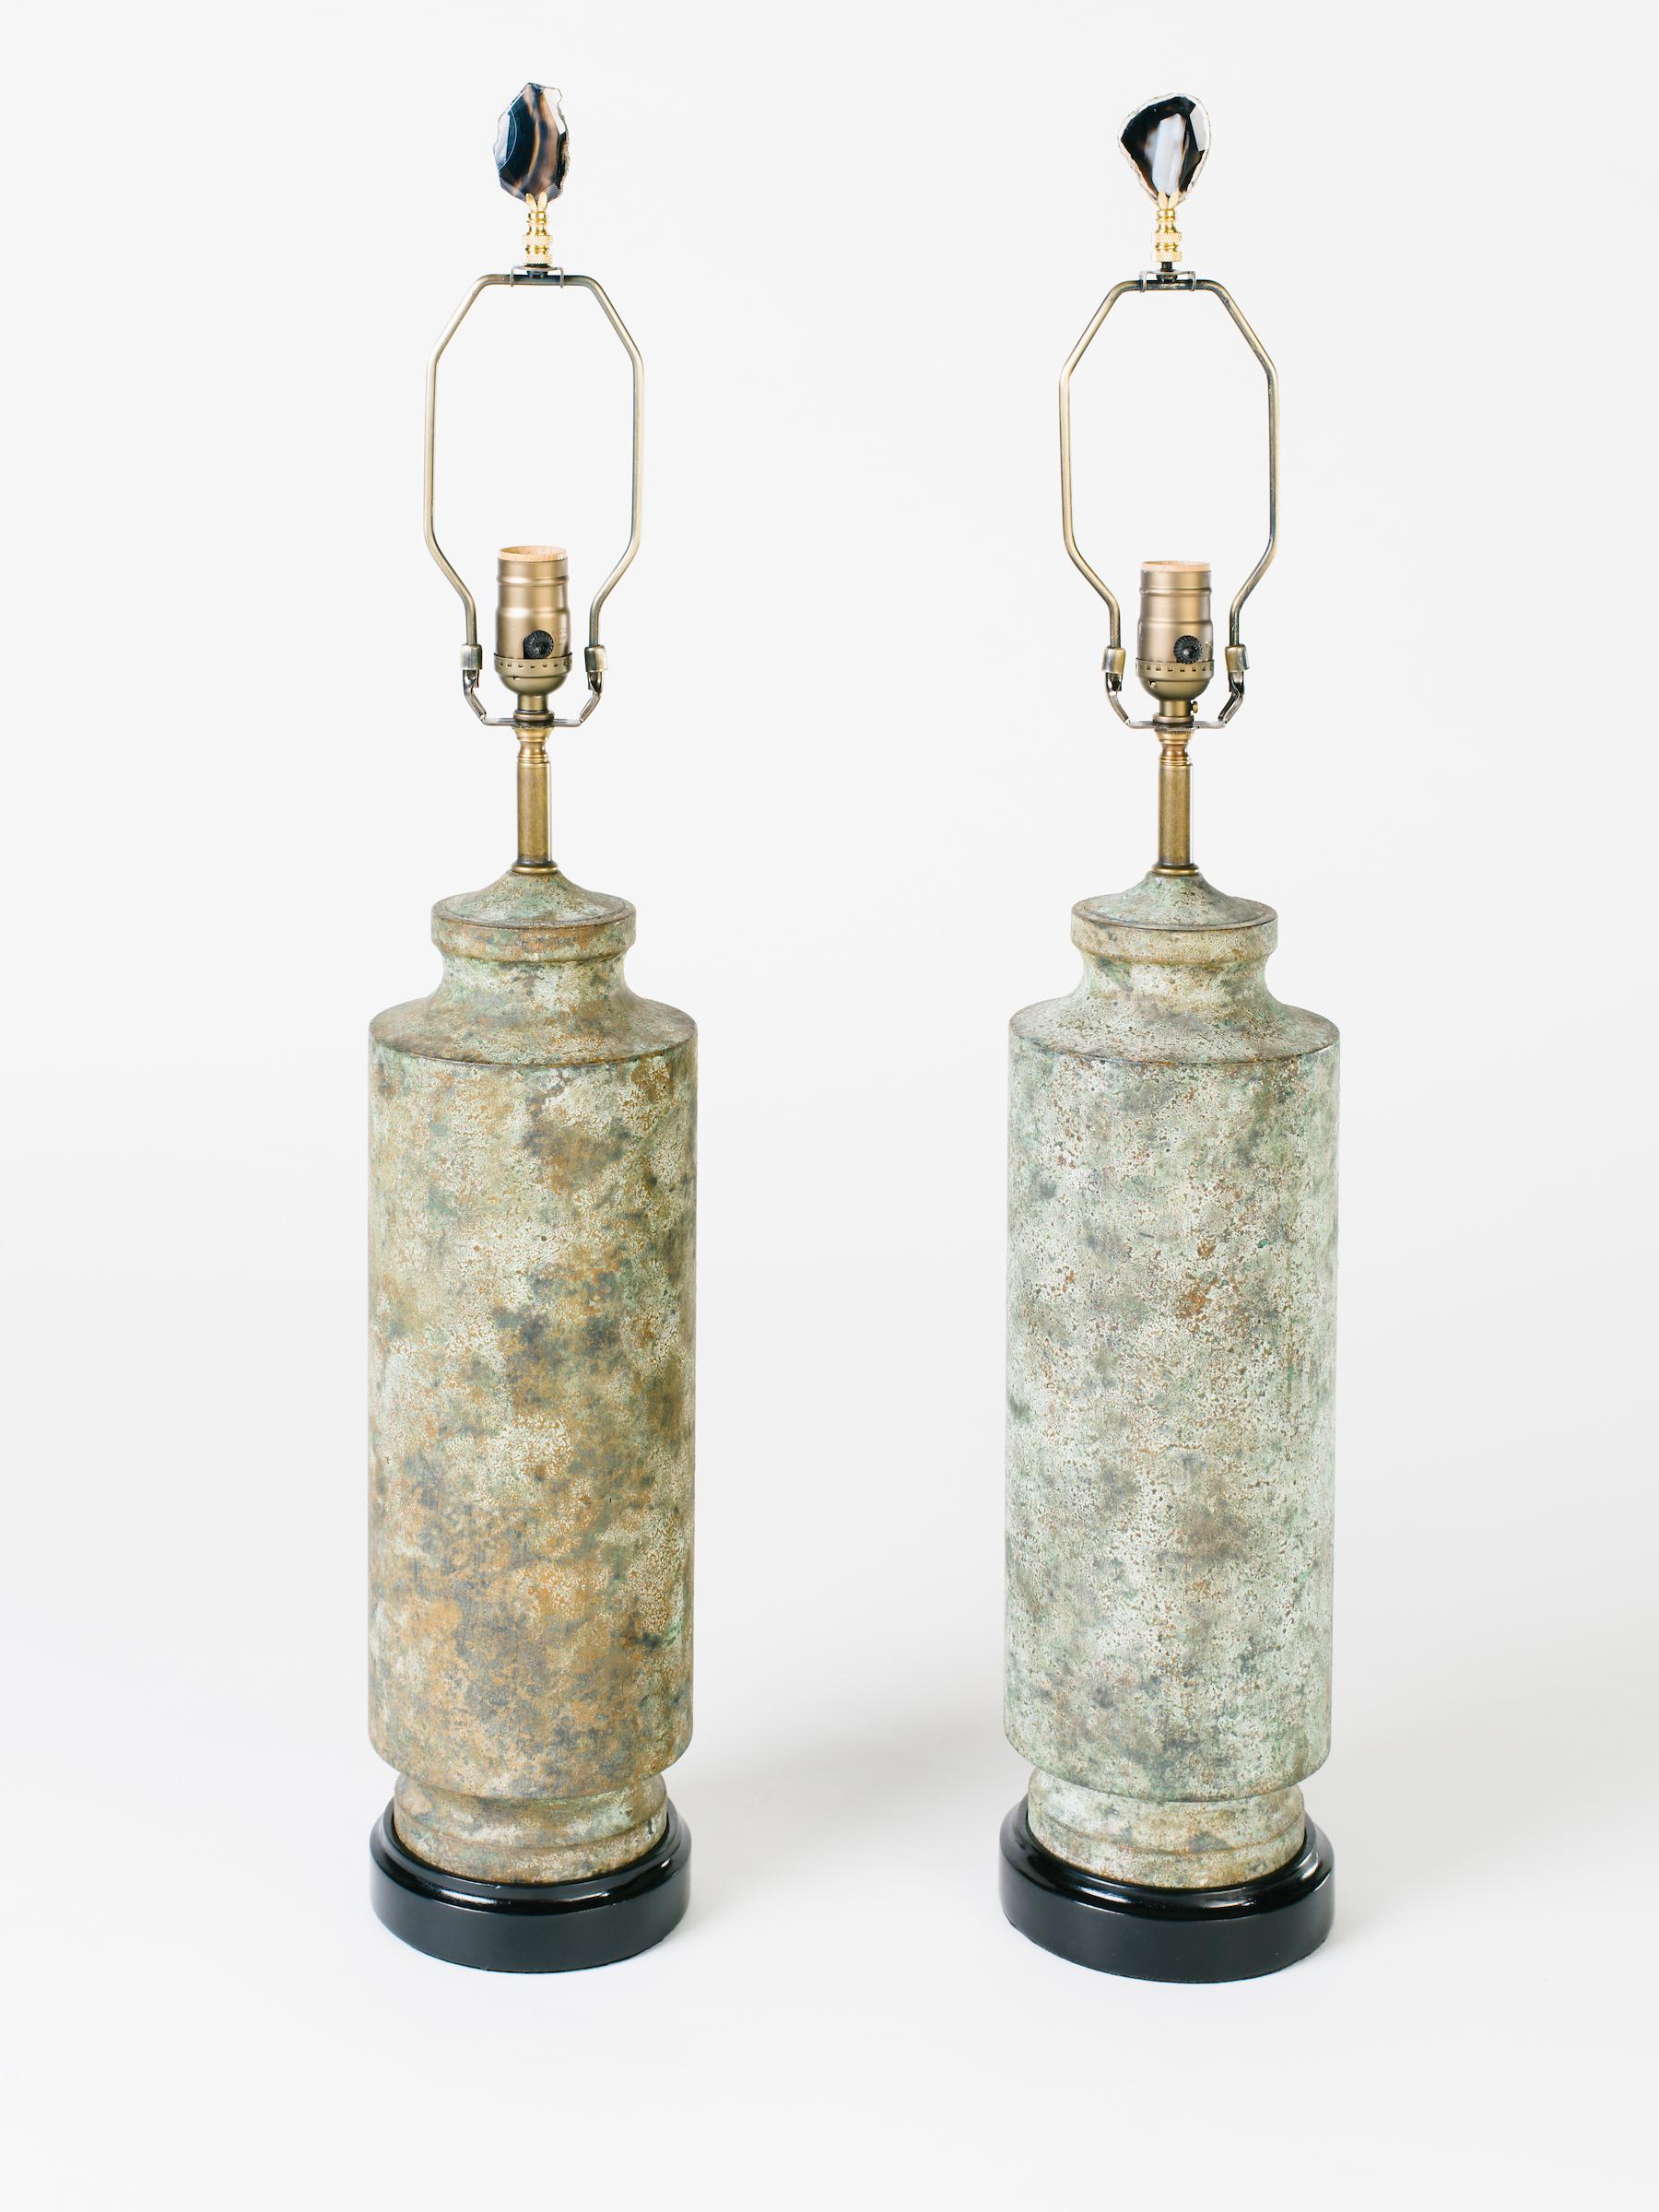 Pair of Mid-Century Modern lamps with Verdigris patina. Made of cast iron, the column lamps have tapered bases and feature stylized pagoda tops. The metal has been purposely oxidized for a distressed, patina look reminiscent of camouflage pattern in